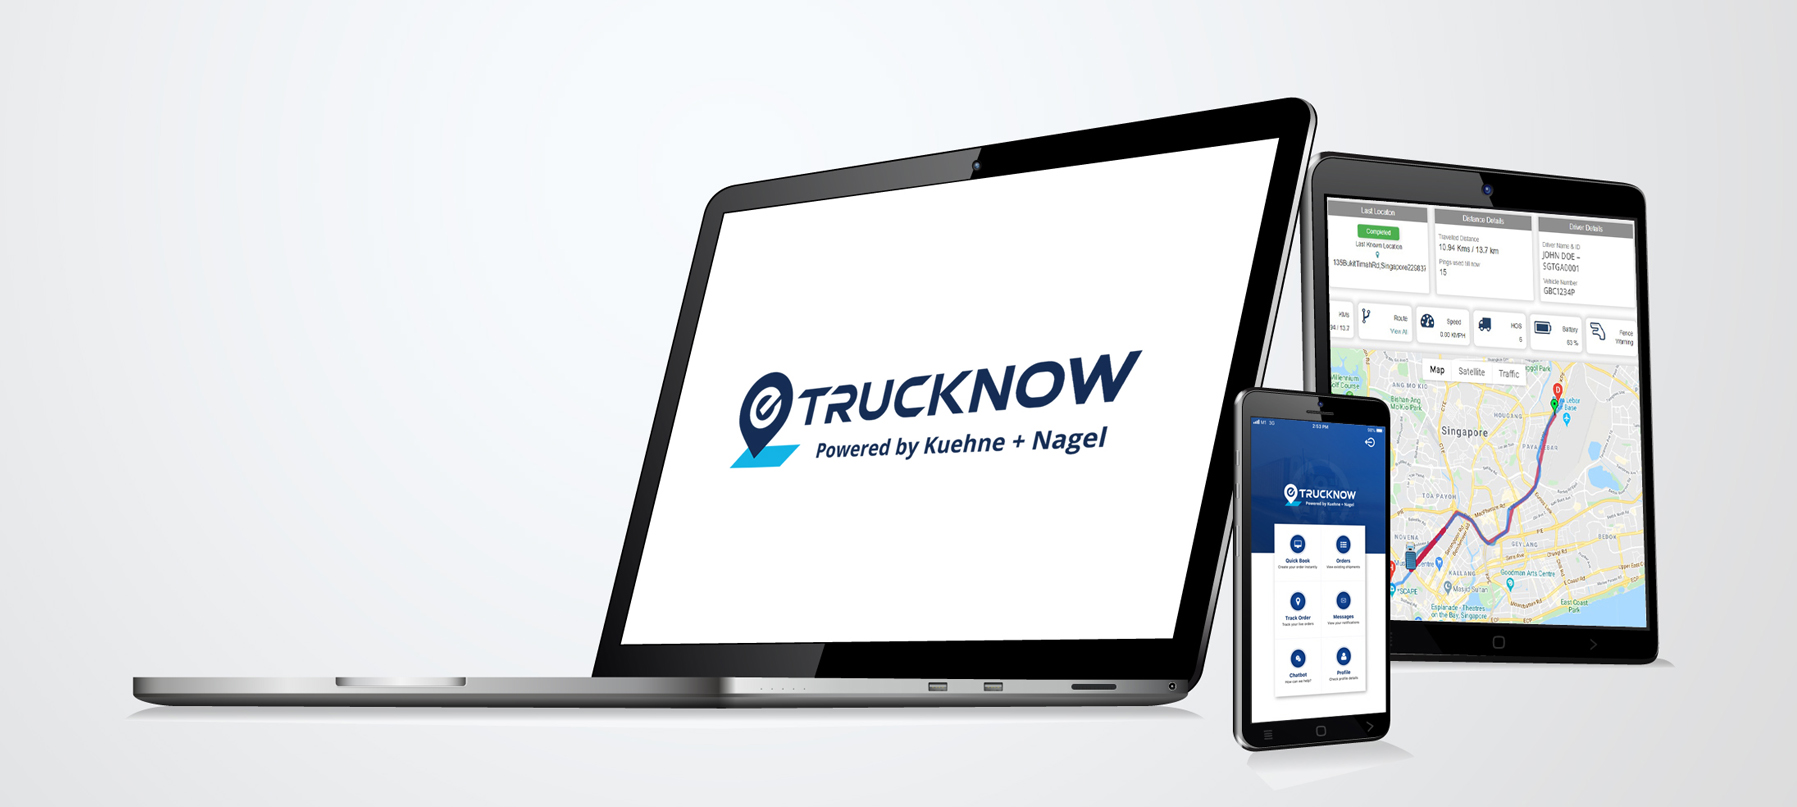 eTrucknow is a suite of road logistics solutions built on our experience to meet your business needs